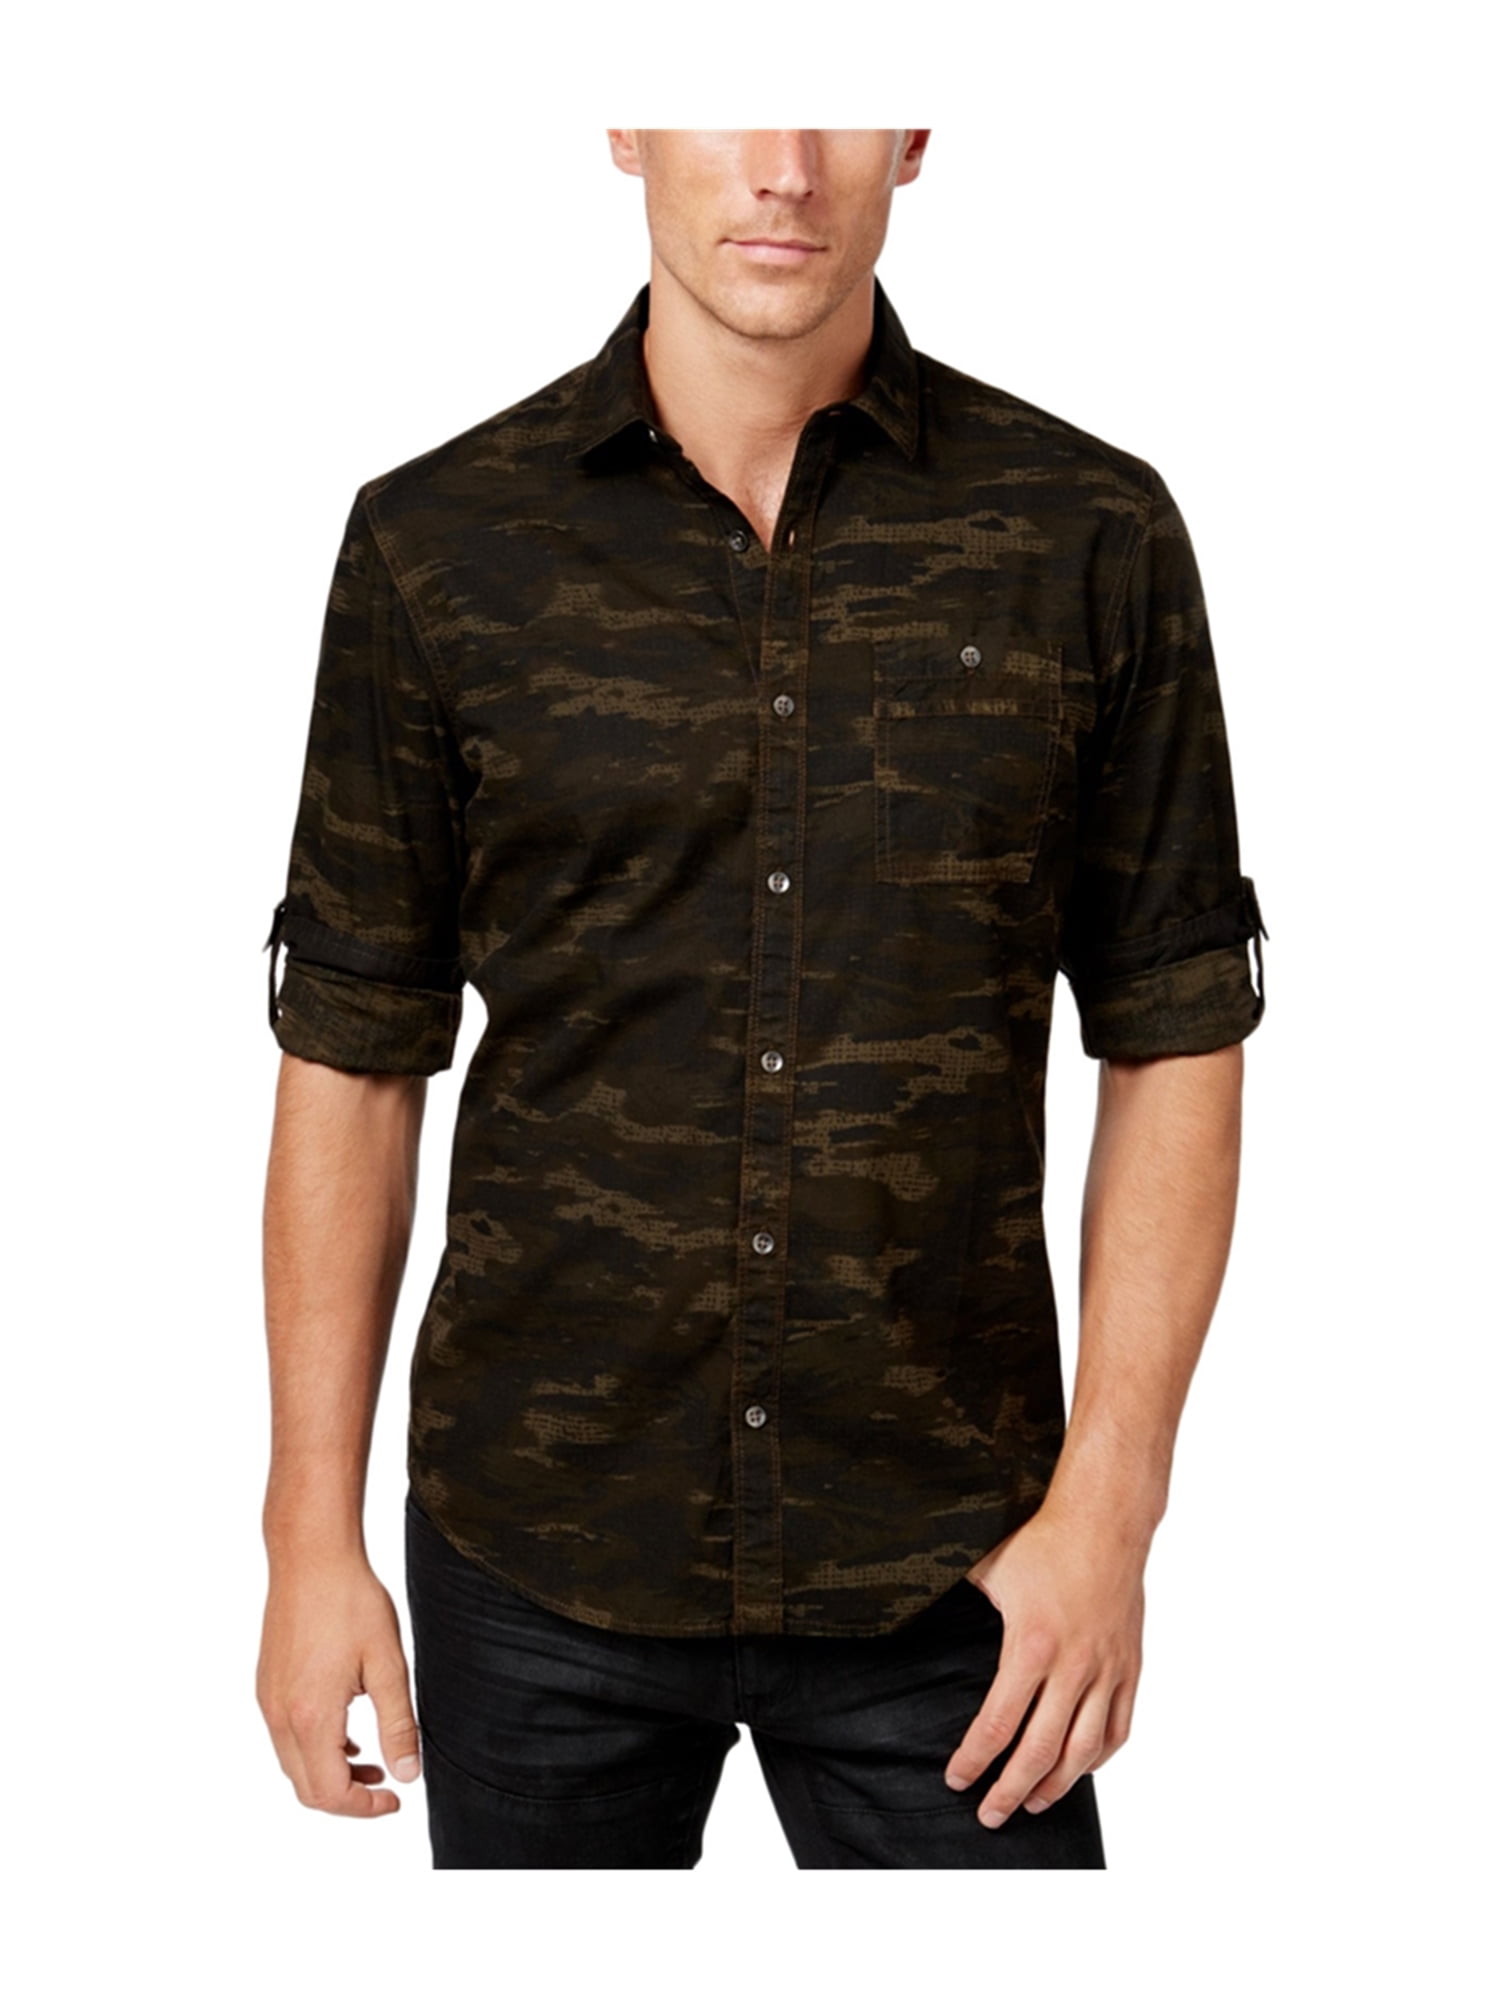 Lutratocro Mens Curved Hem Casual Camo Print Lapel Button Down Shirts